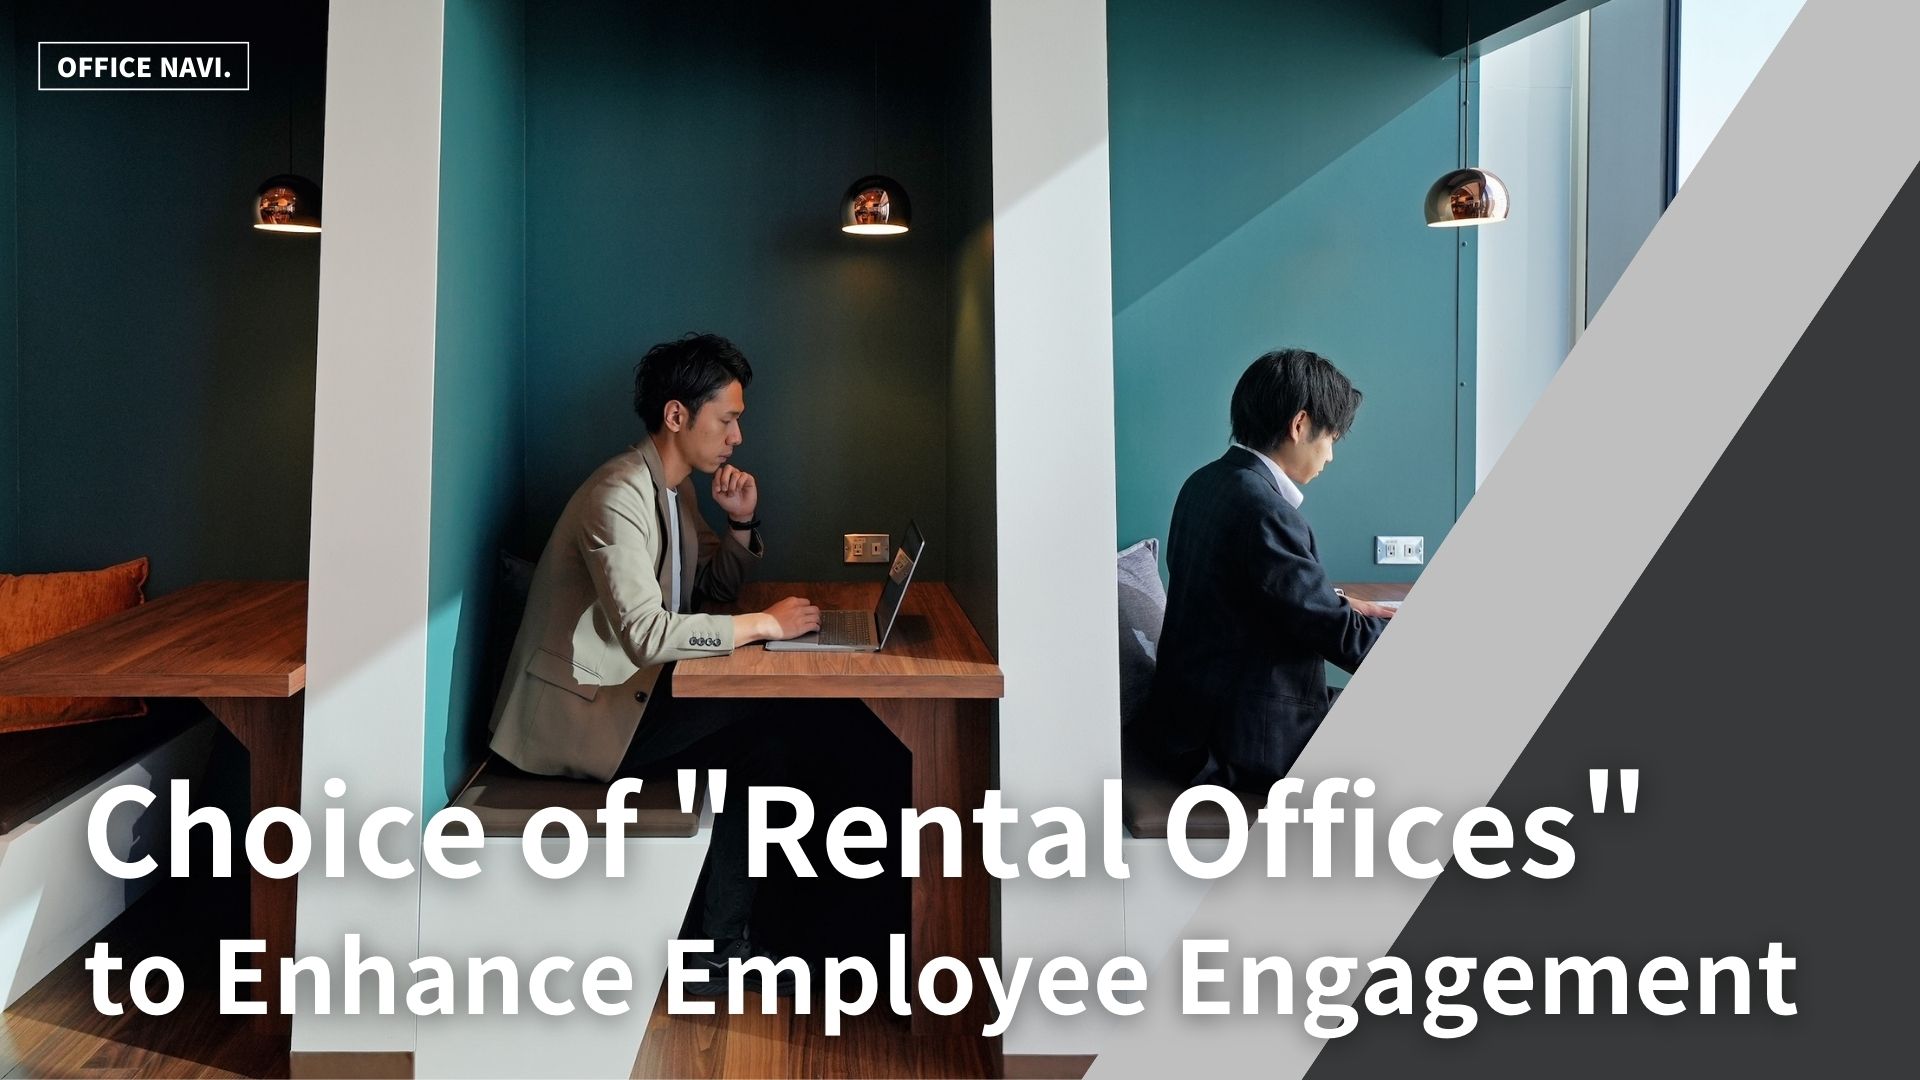 Choice of "Rental Offices" to Enhance Employee Engagement